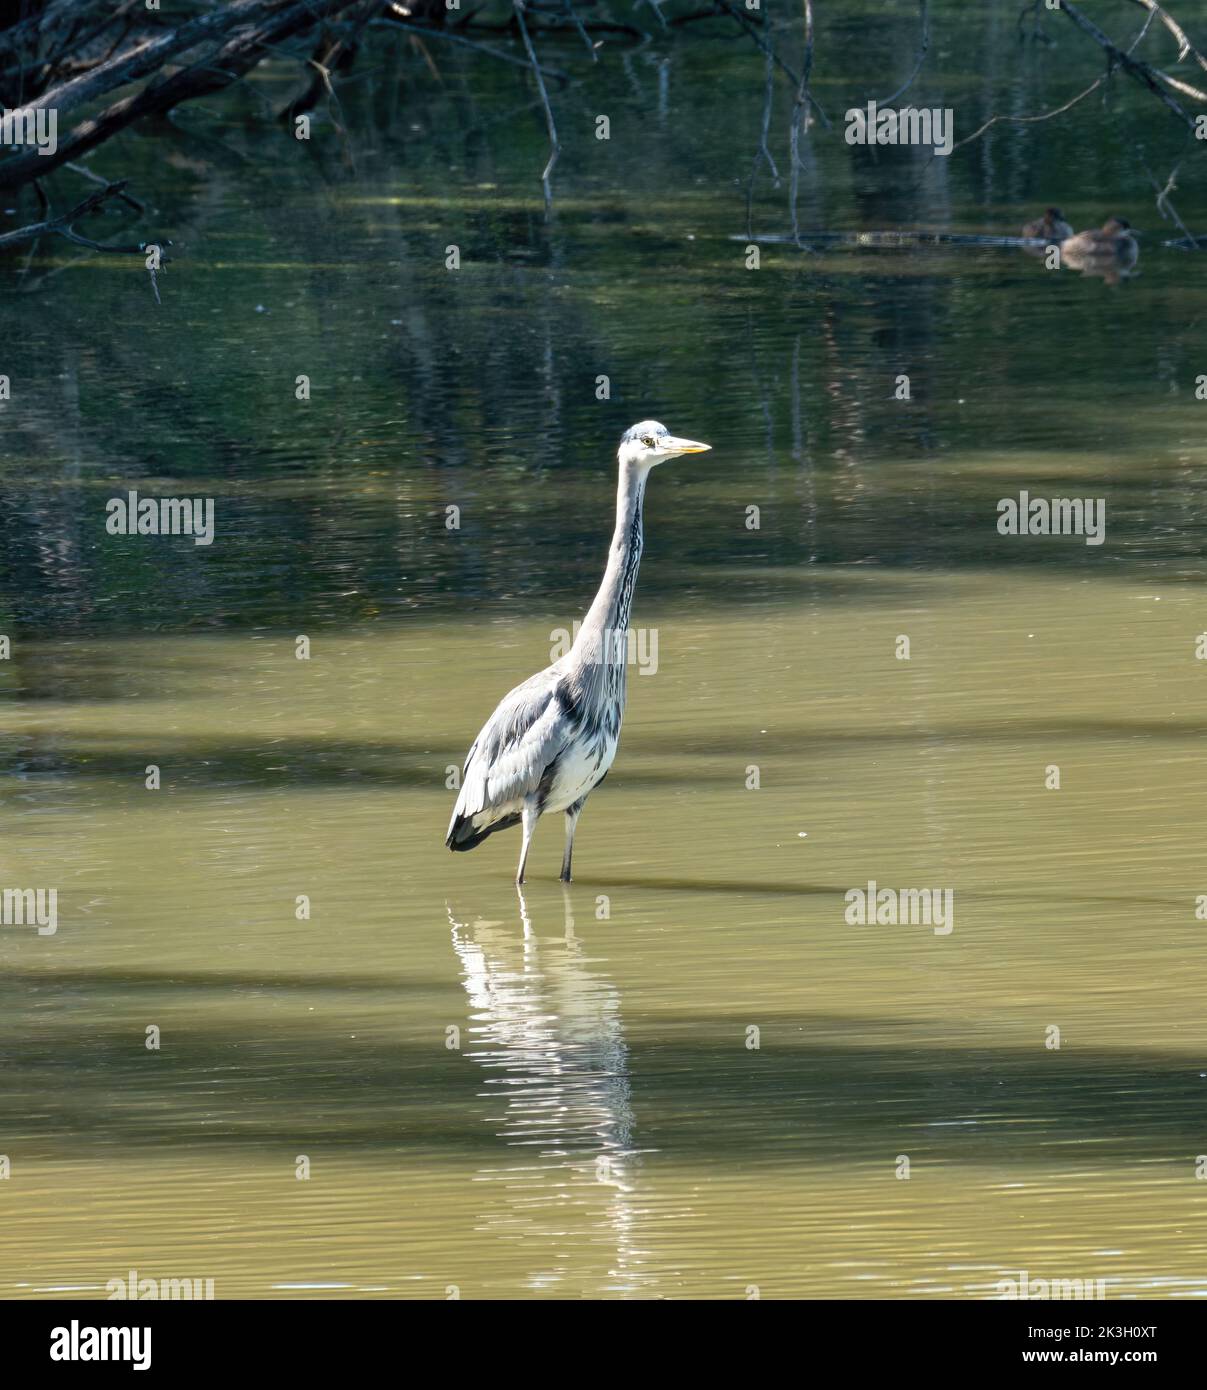 Grey Heron fishing in a Pond Stock Photo